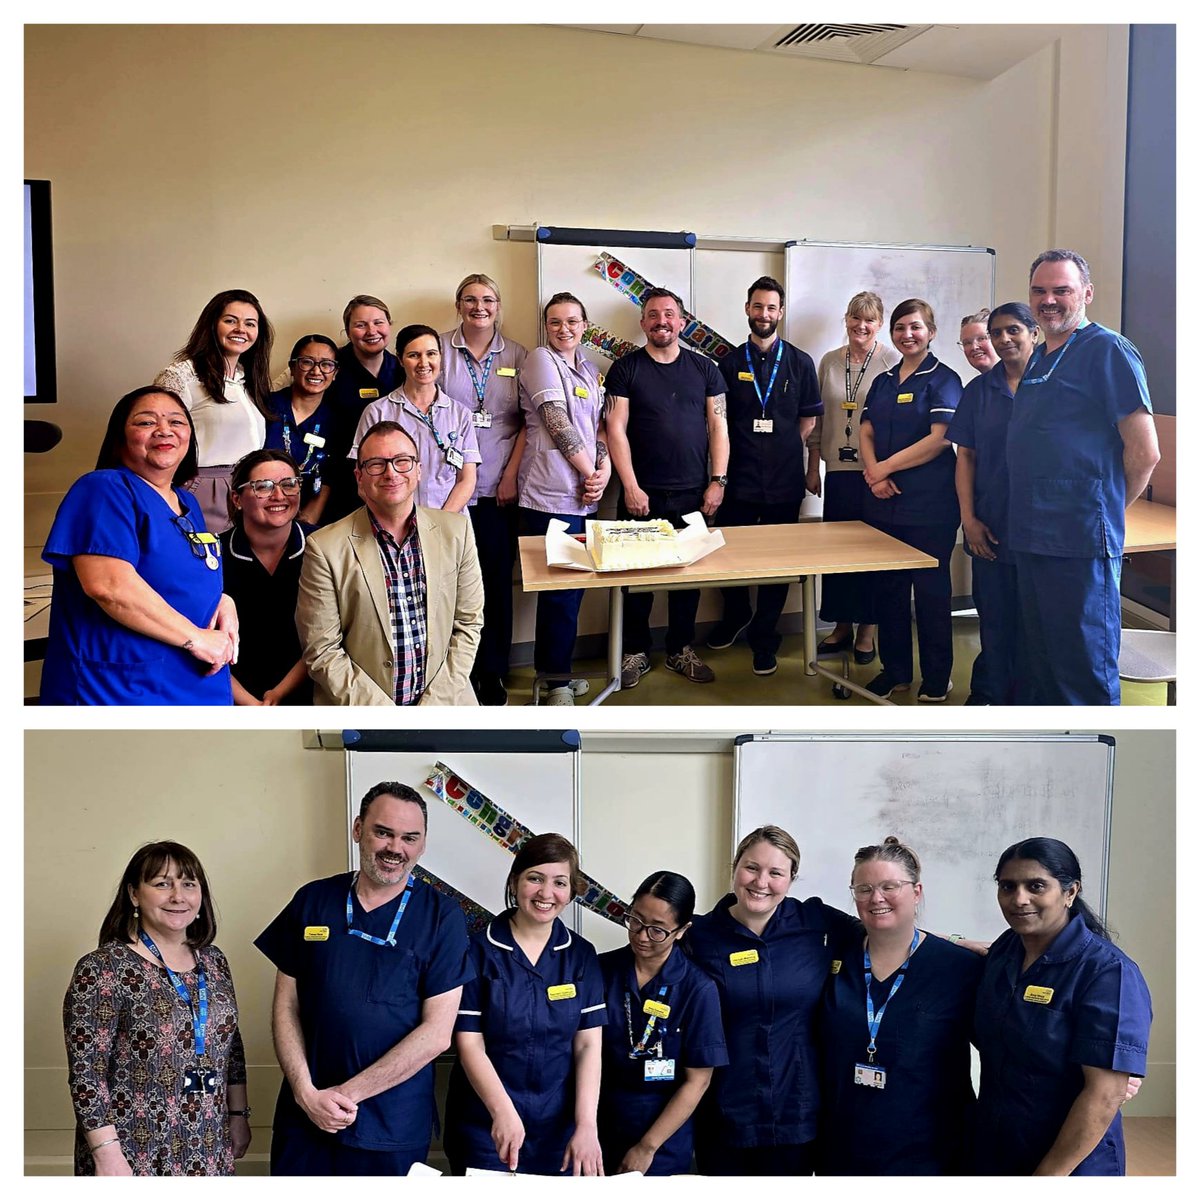 Huge congratulations and welldone to our recently Qualified Nursing Associates and Registered Nurse Apprentices #celebratingsuccess @NorthBristolNHS @NBTApprentices1 Thanks Maria Wallen, Mike Puckey and Juliette Huges for joining us in celebrating their success @EducationNBT